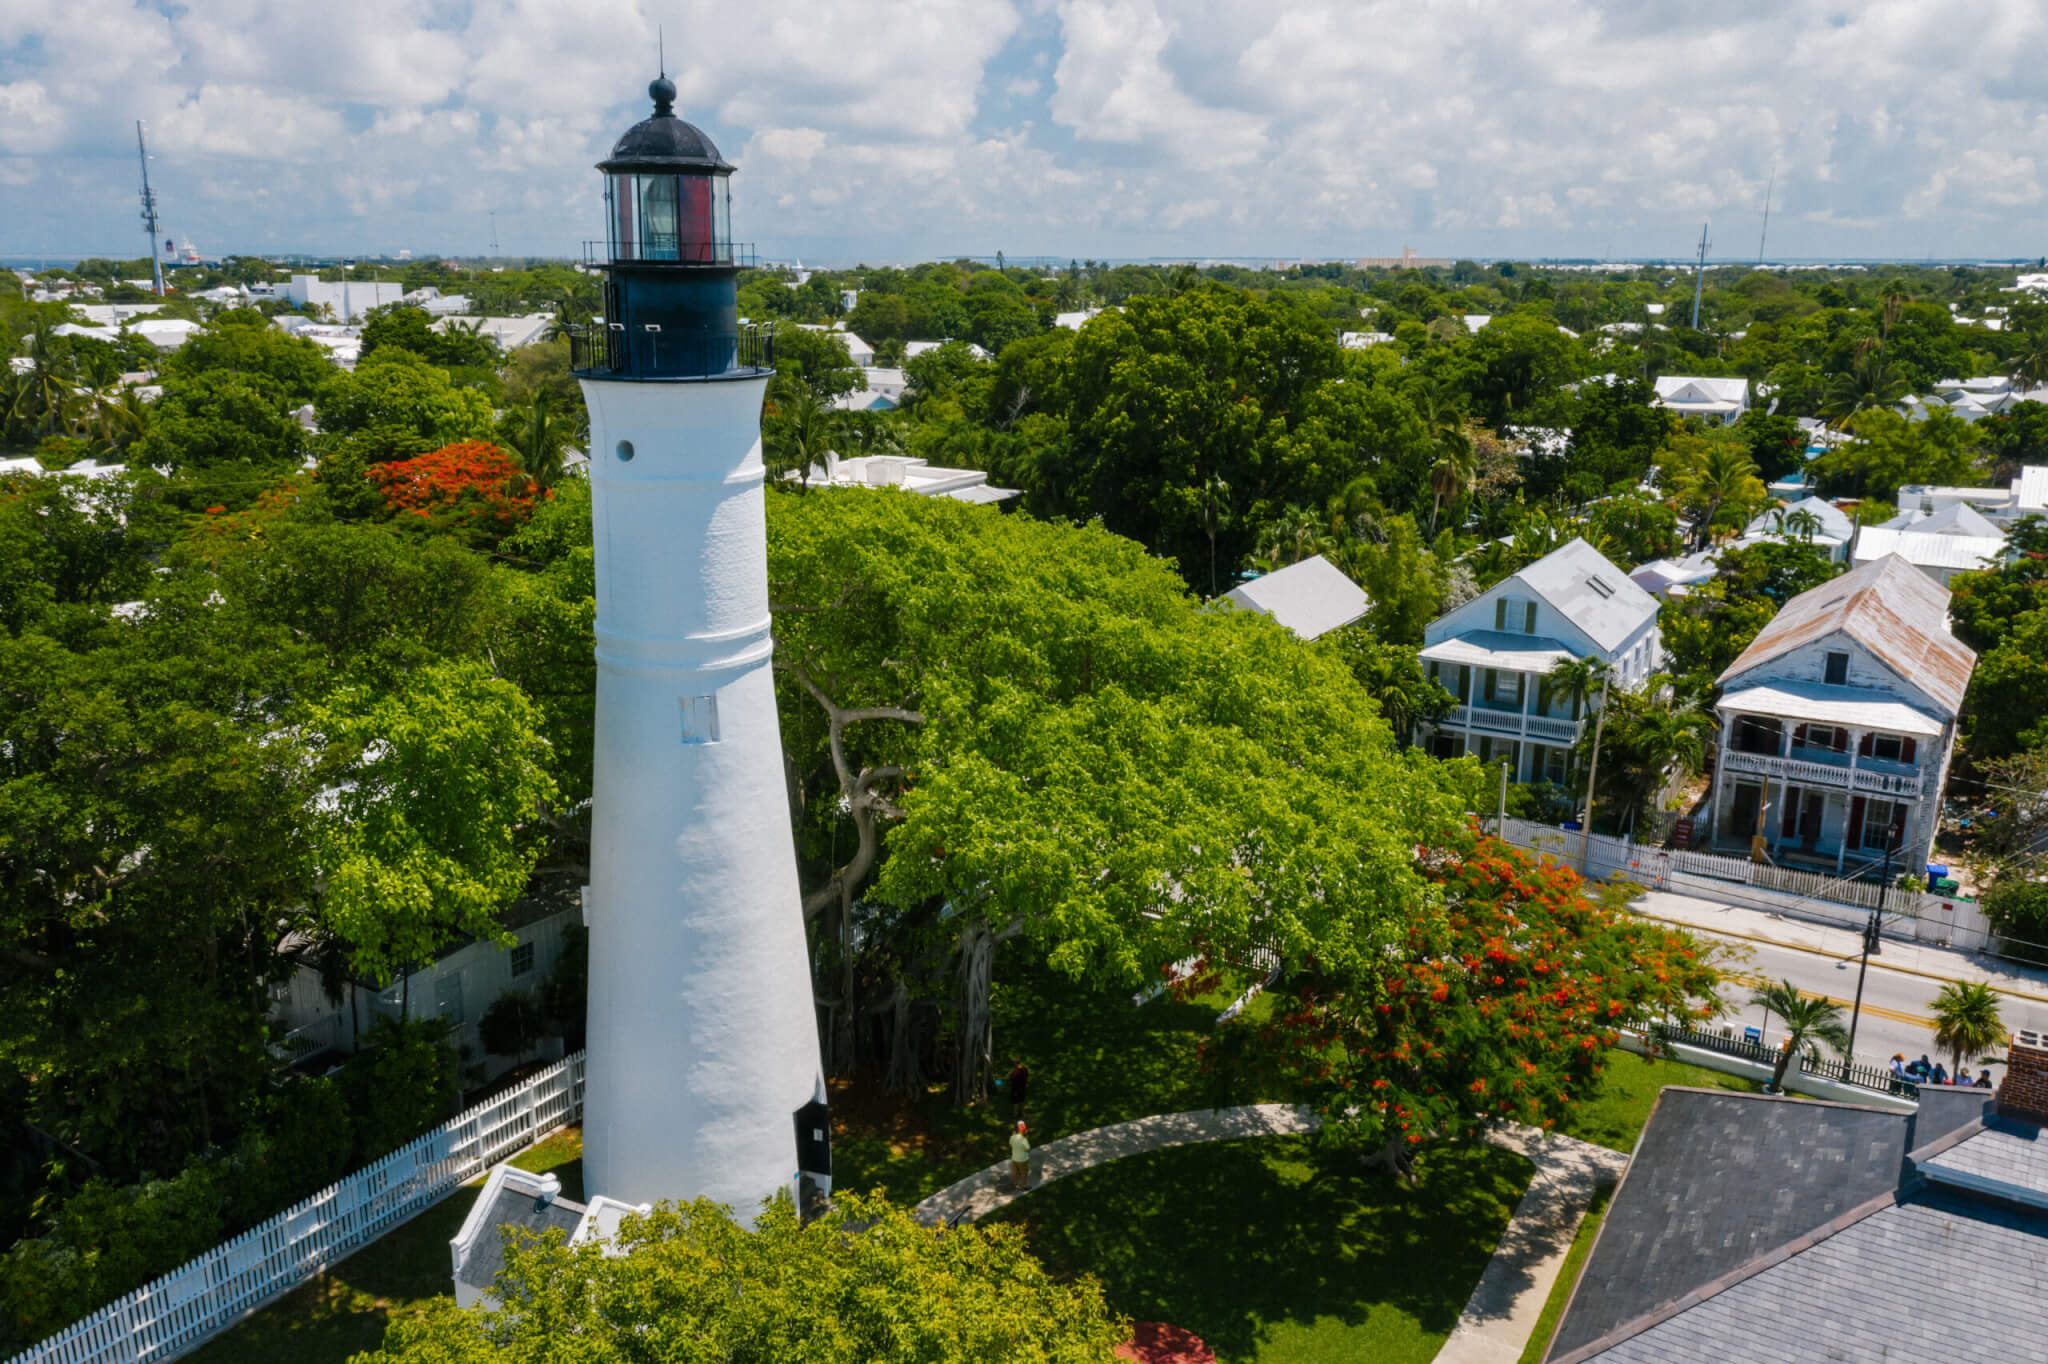 Aerial shot of the key west lighthouse in florida